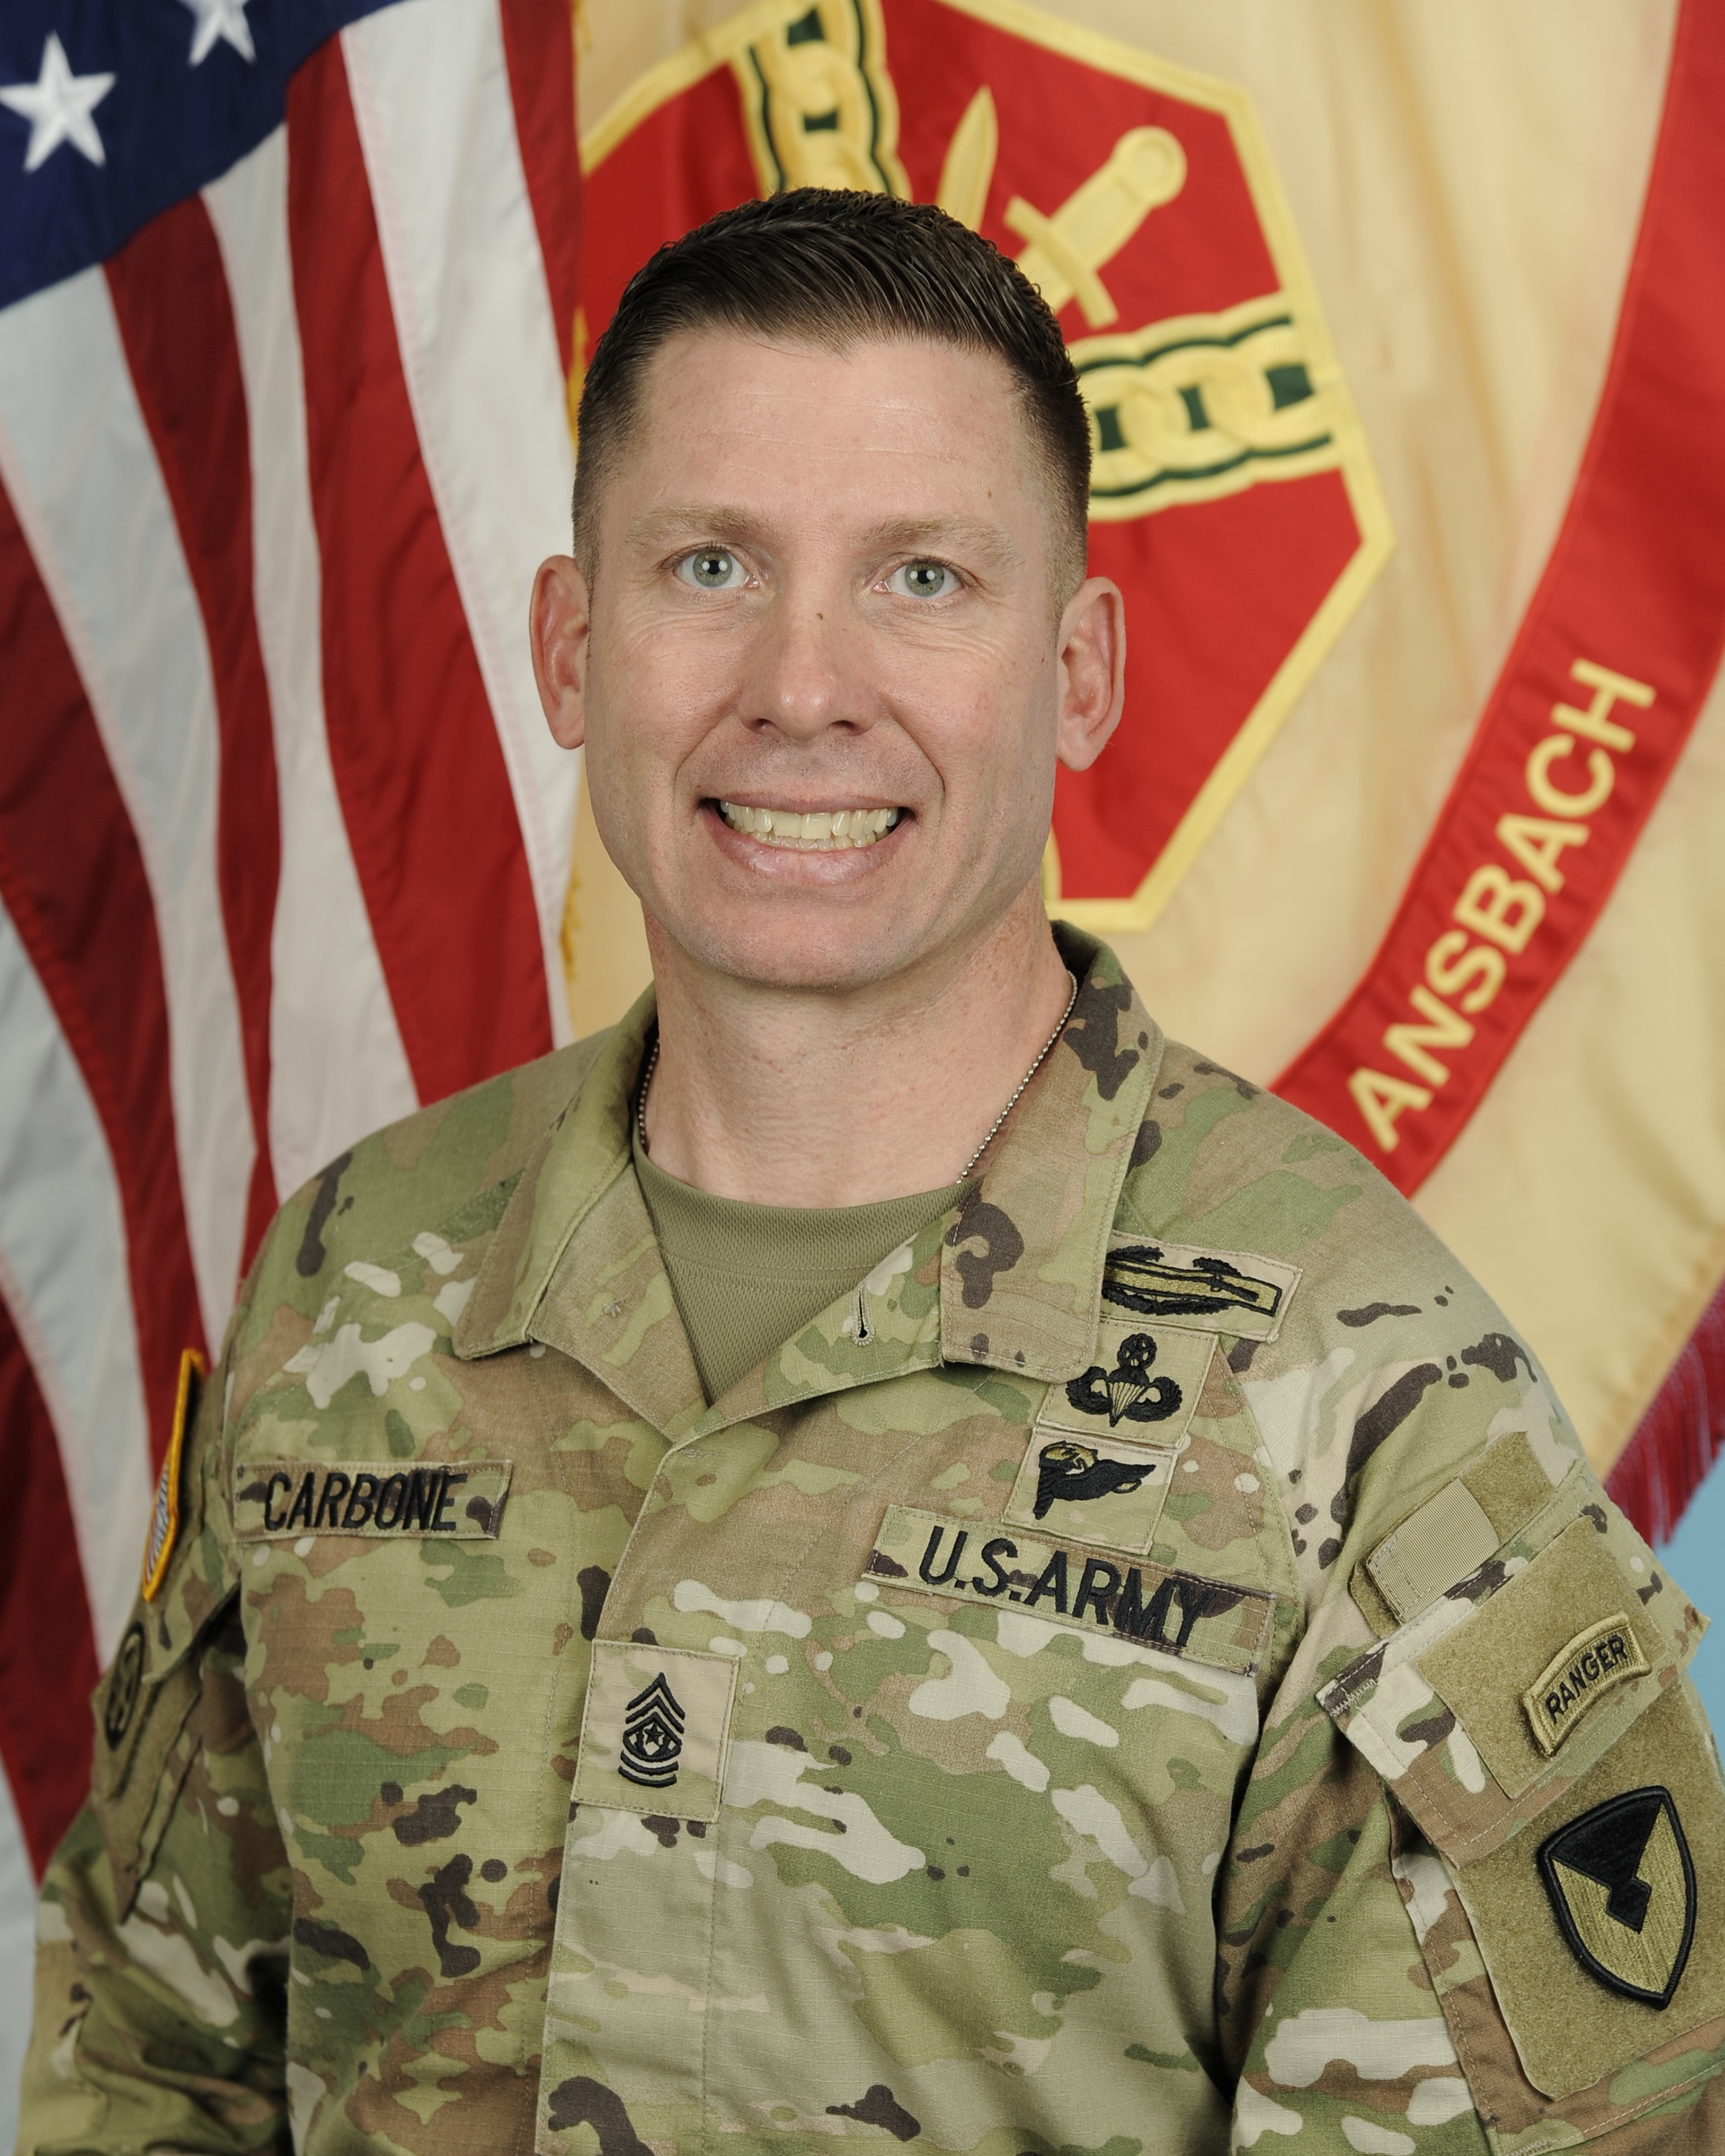 Command Sgt. Maj. Christopher Carbone